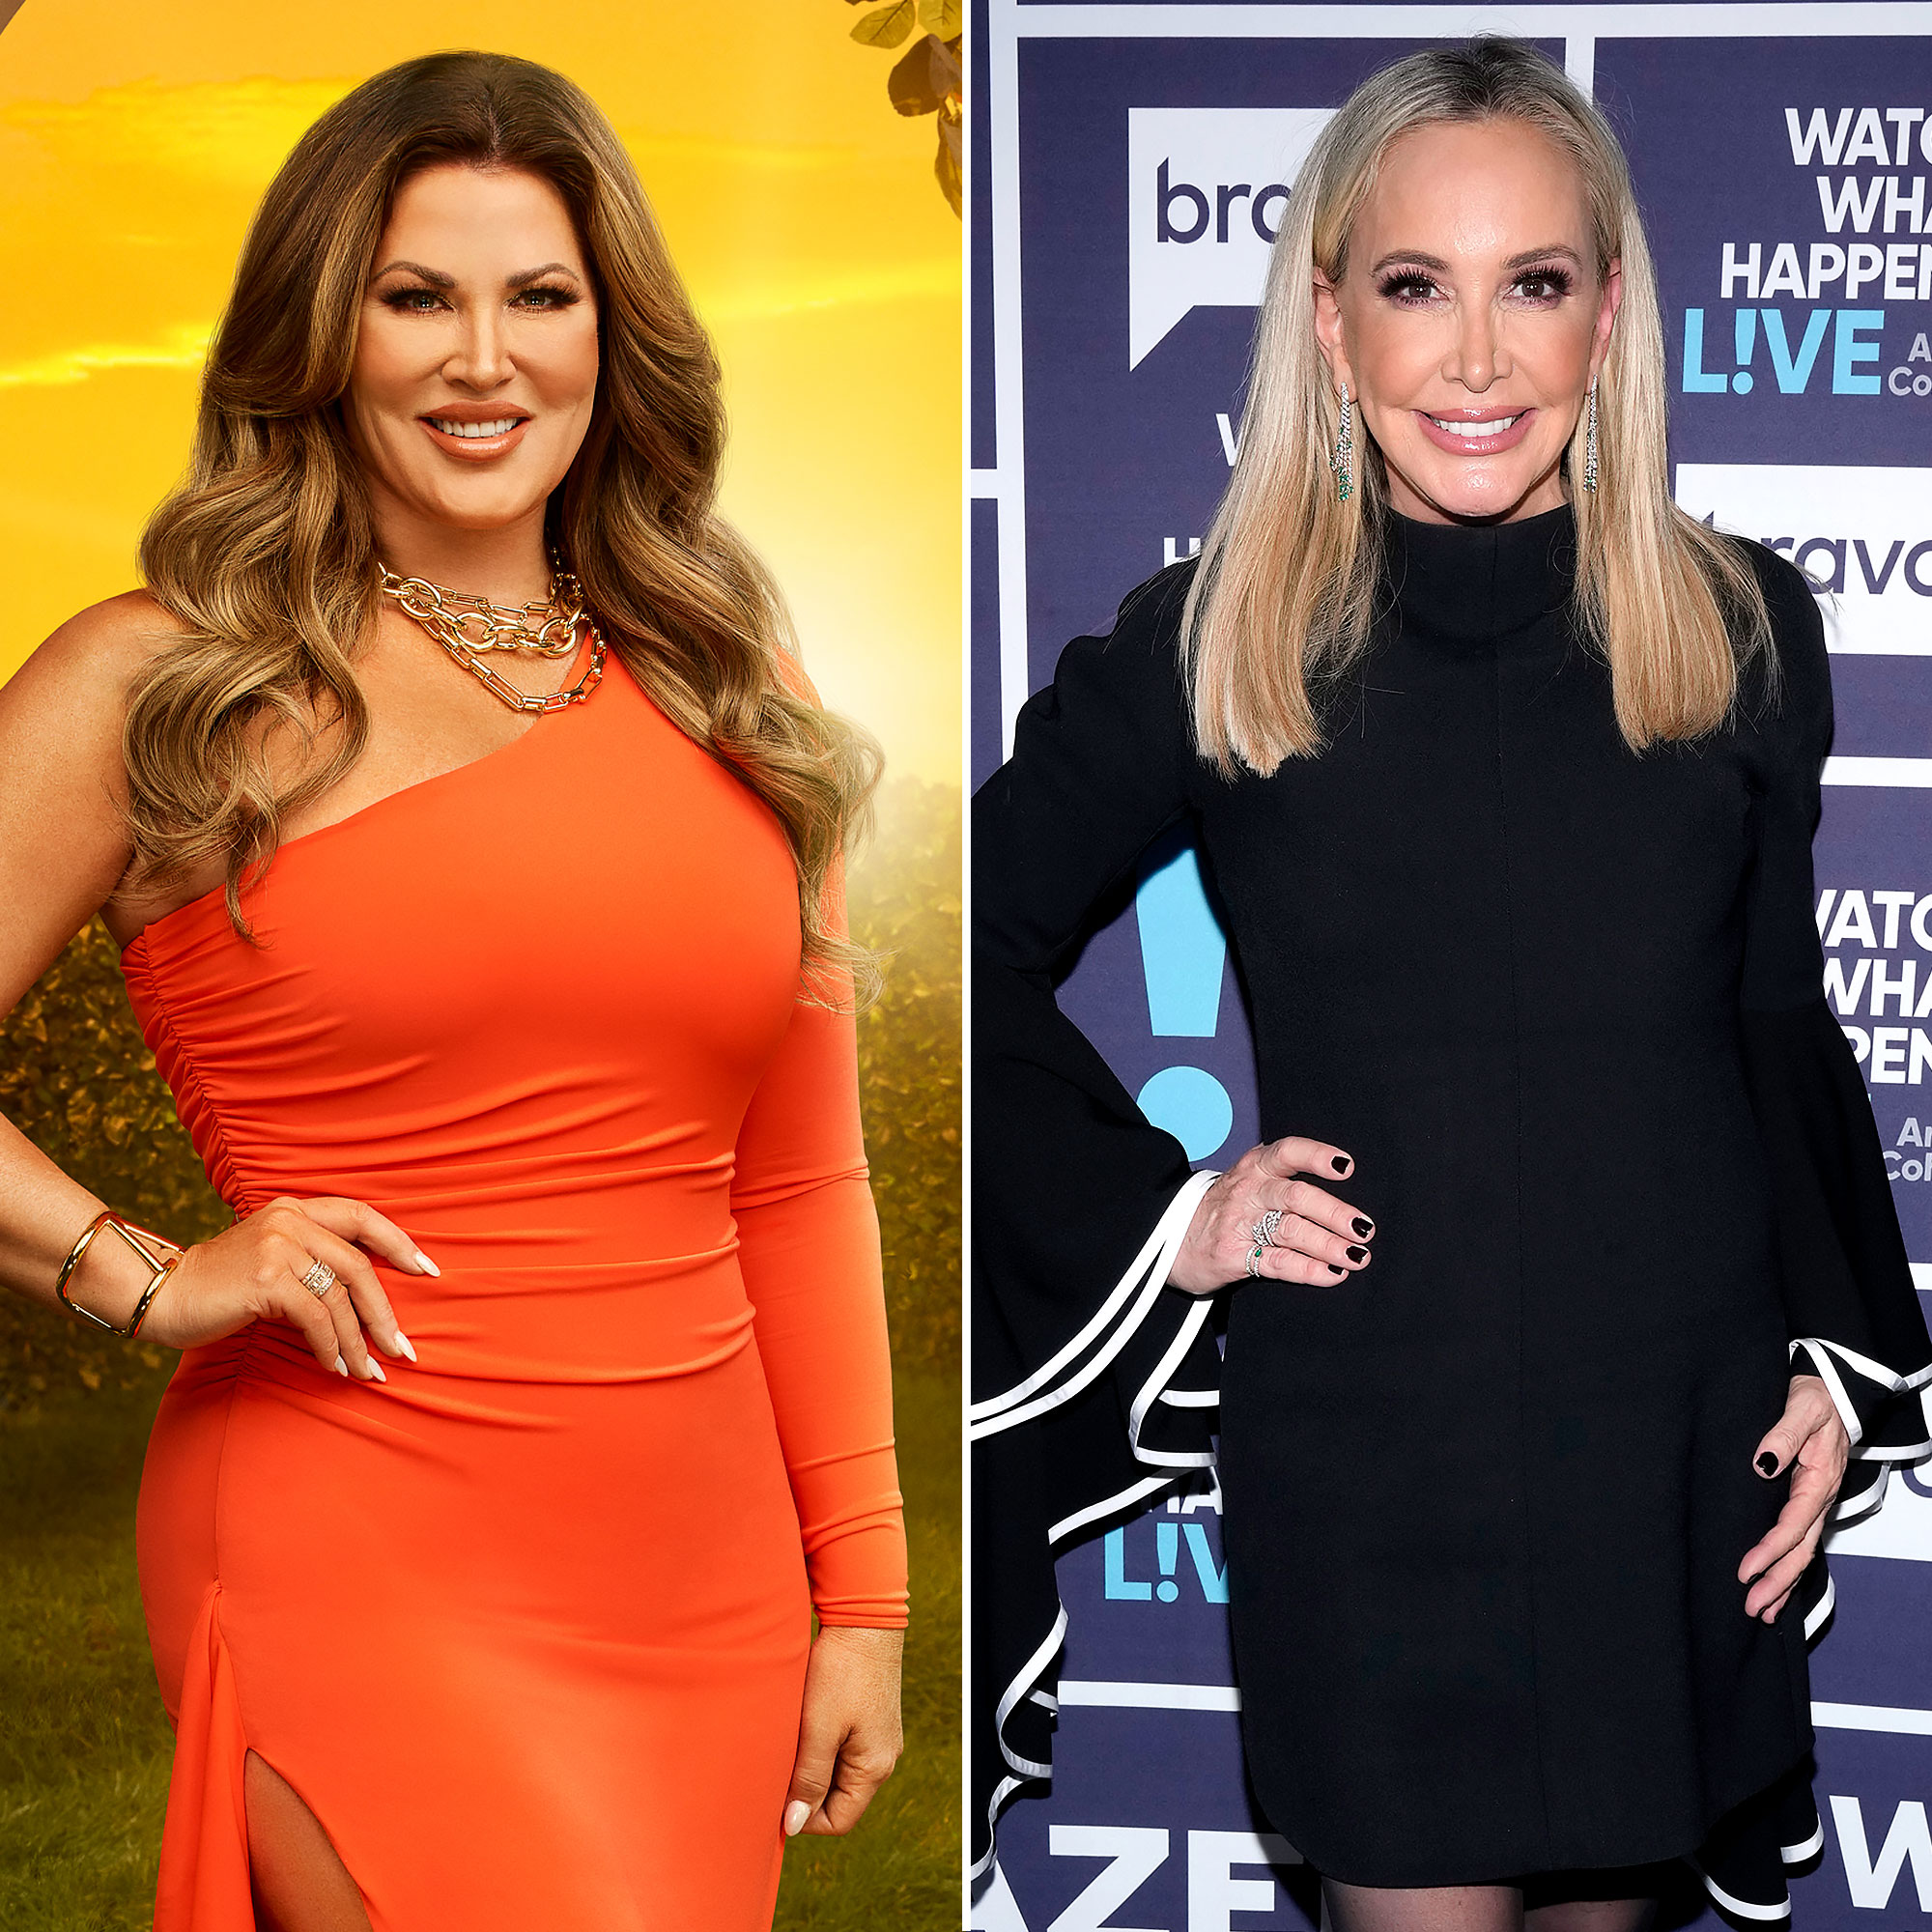 RHOCs Emily Simpson Says Shannon Beador Was Spiraling Before pic